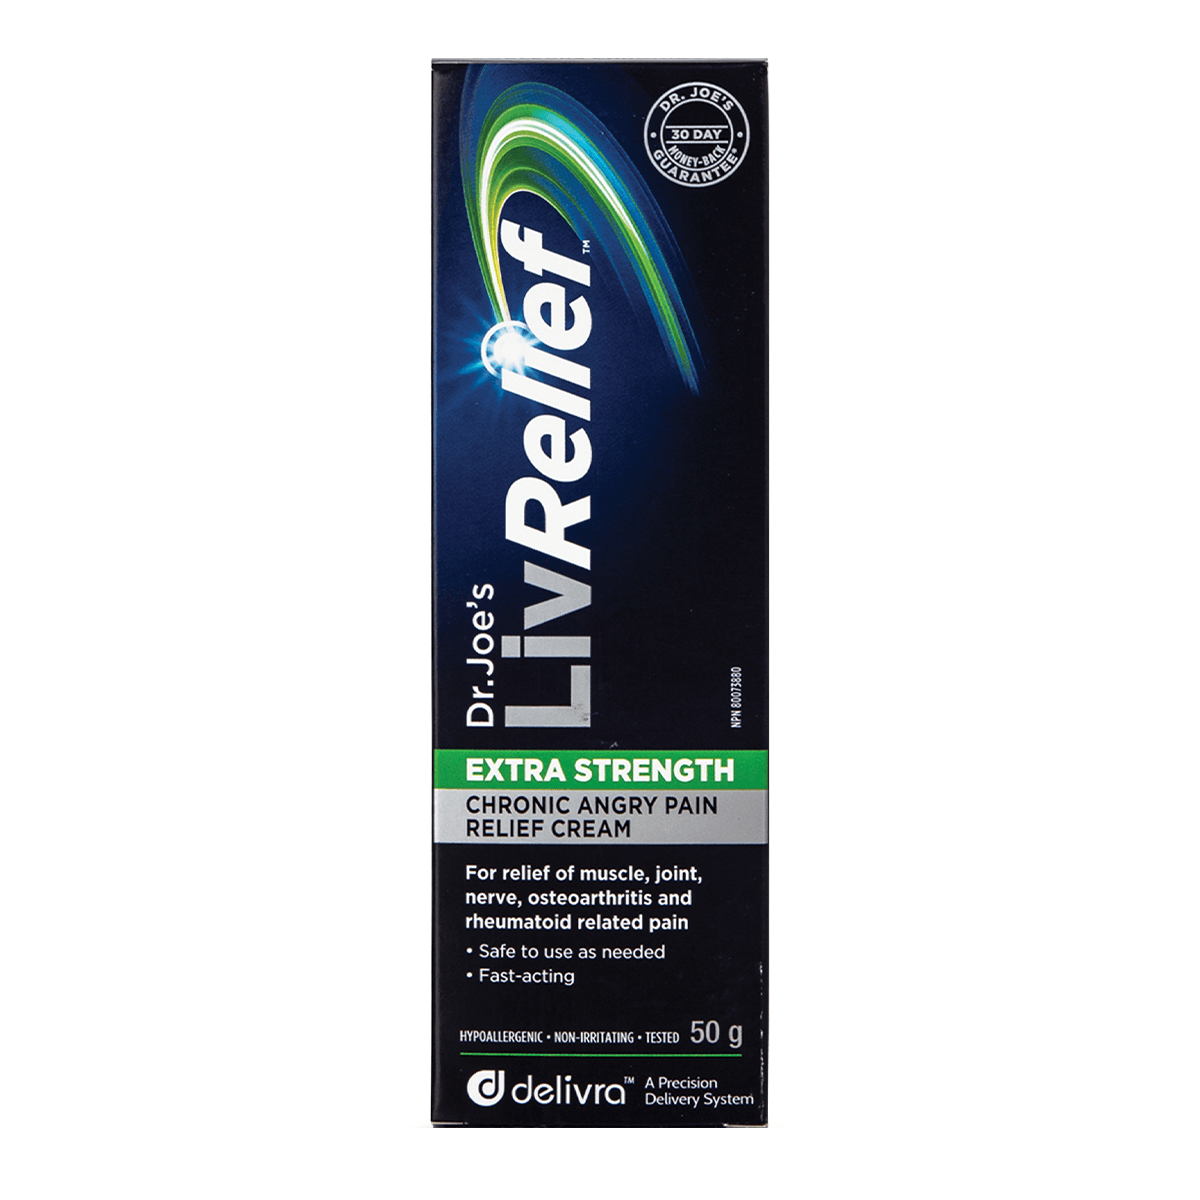 LivRelief Pain Relief Cream Extra Strength 50g Personal Care at Village Vitamin Store